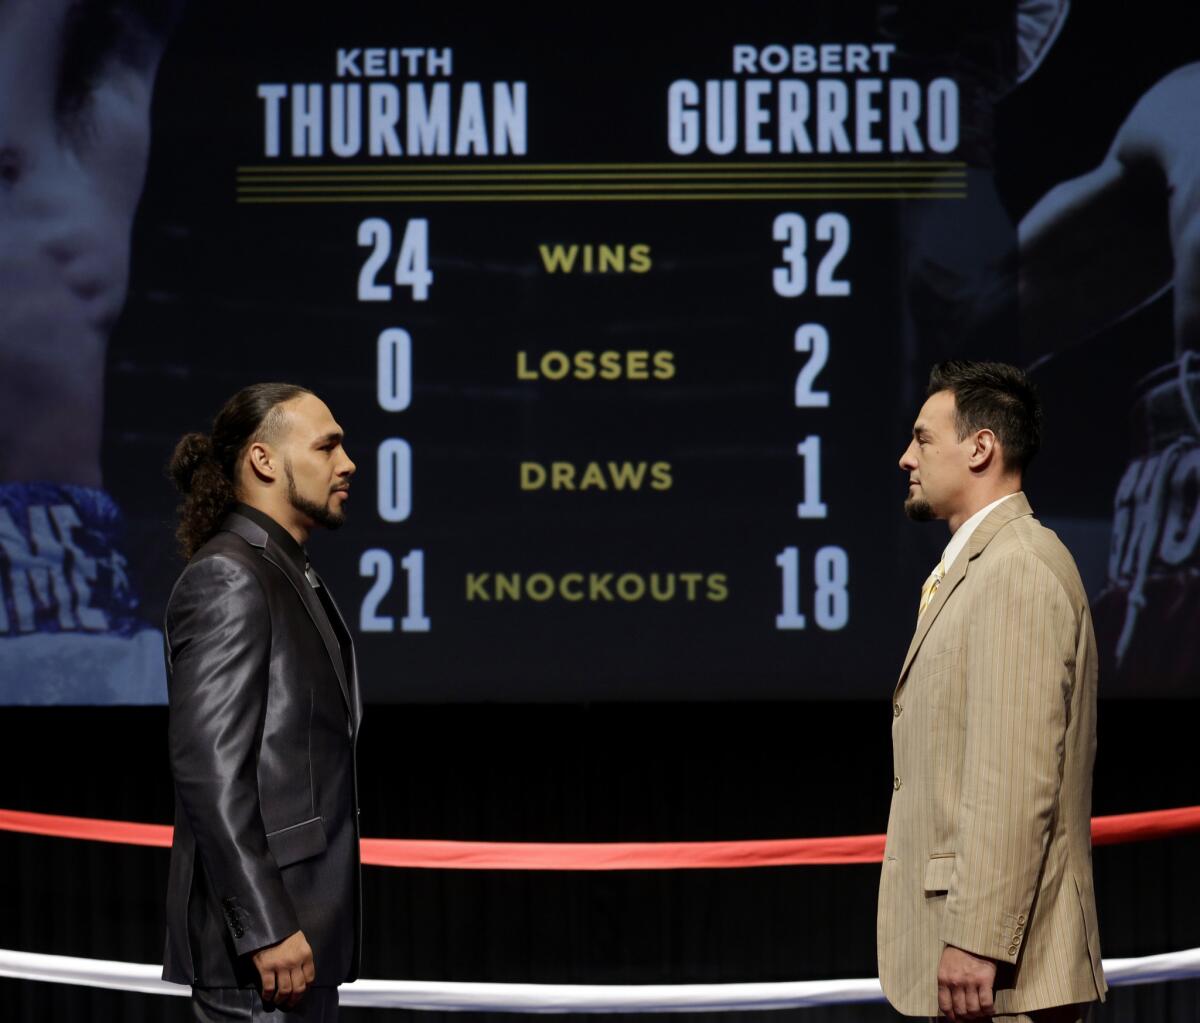 Boxers Keith Thurman, left, and Robert Guerrero appear during a news conference in New York on Wednesday. A fight between Thurman and Guerrero will be broadcast in prime time on NBC on March 7.